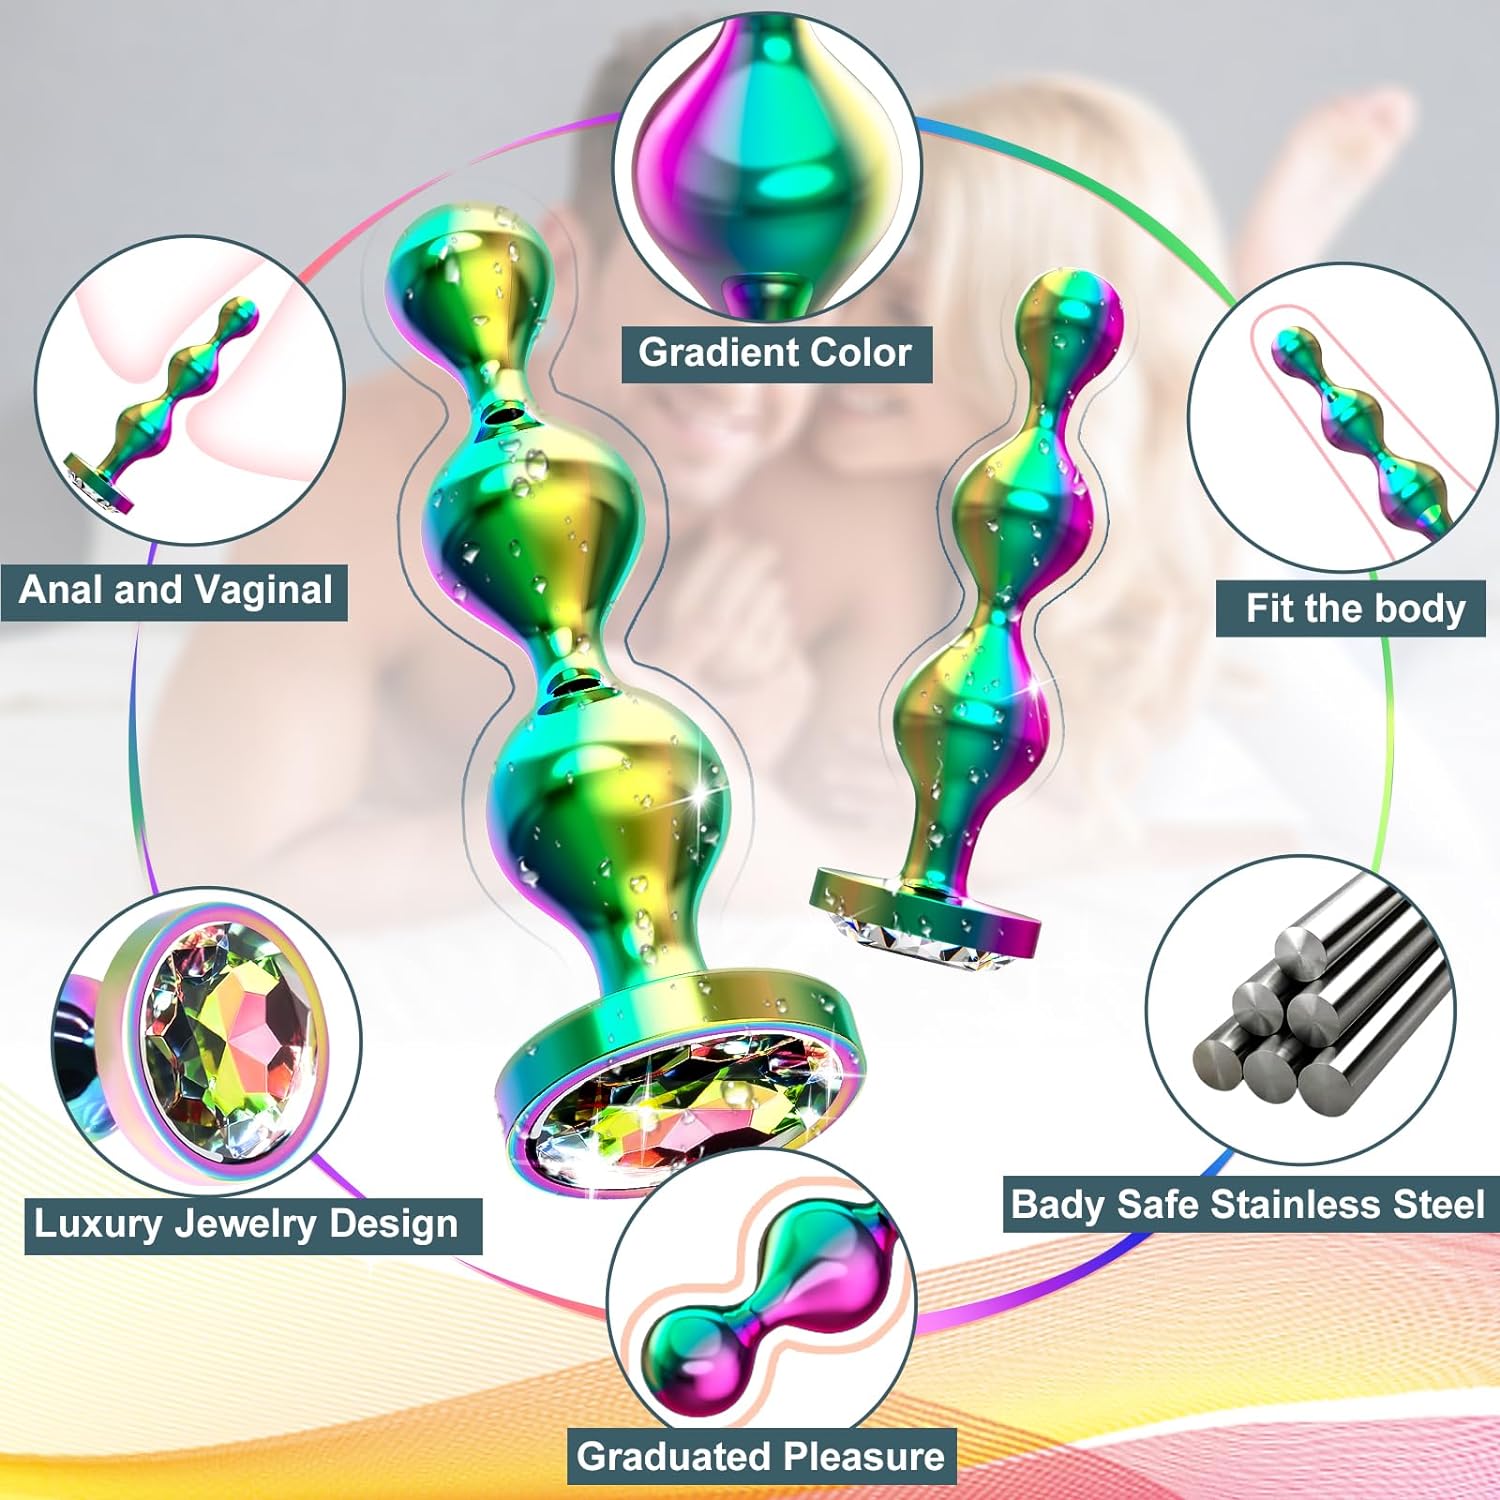 Metal Anal Beads Butt Plug Sex Toys for Men Women and Couples, Anal Trainer Pack of 3 Graduated StainlessSteelAdult Toys, Prostate Massager Mens Anal Training with Luxury Jewelry Design